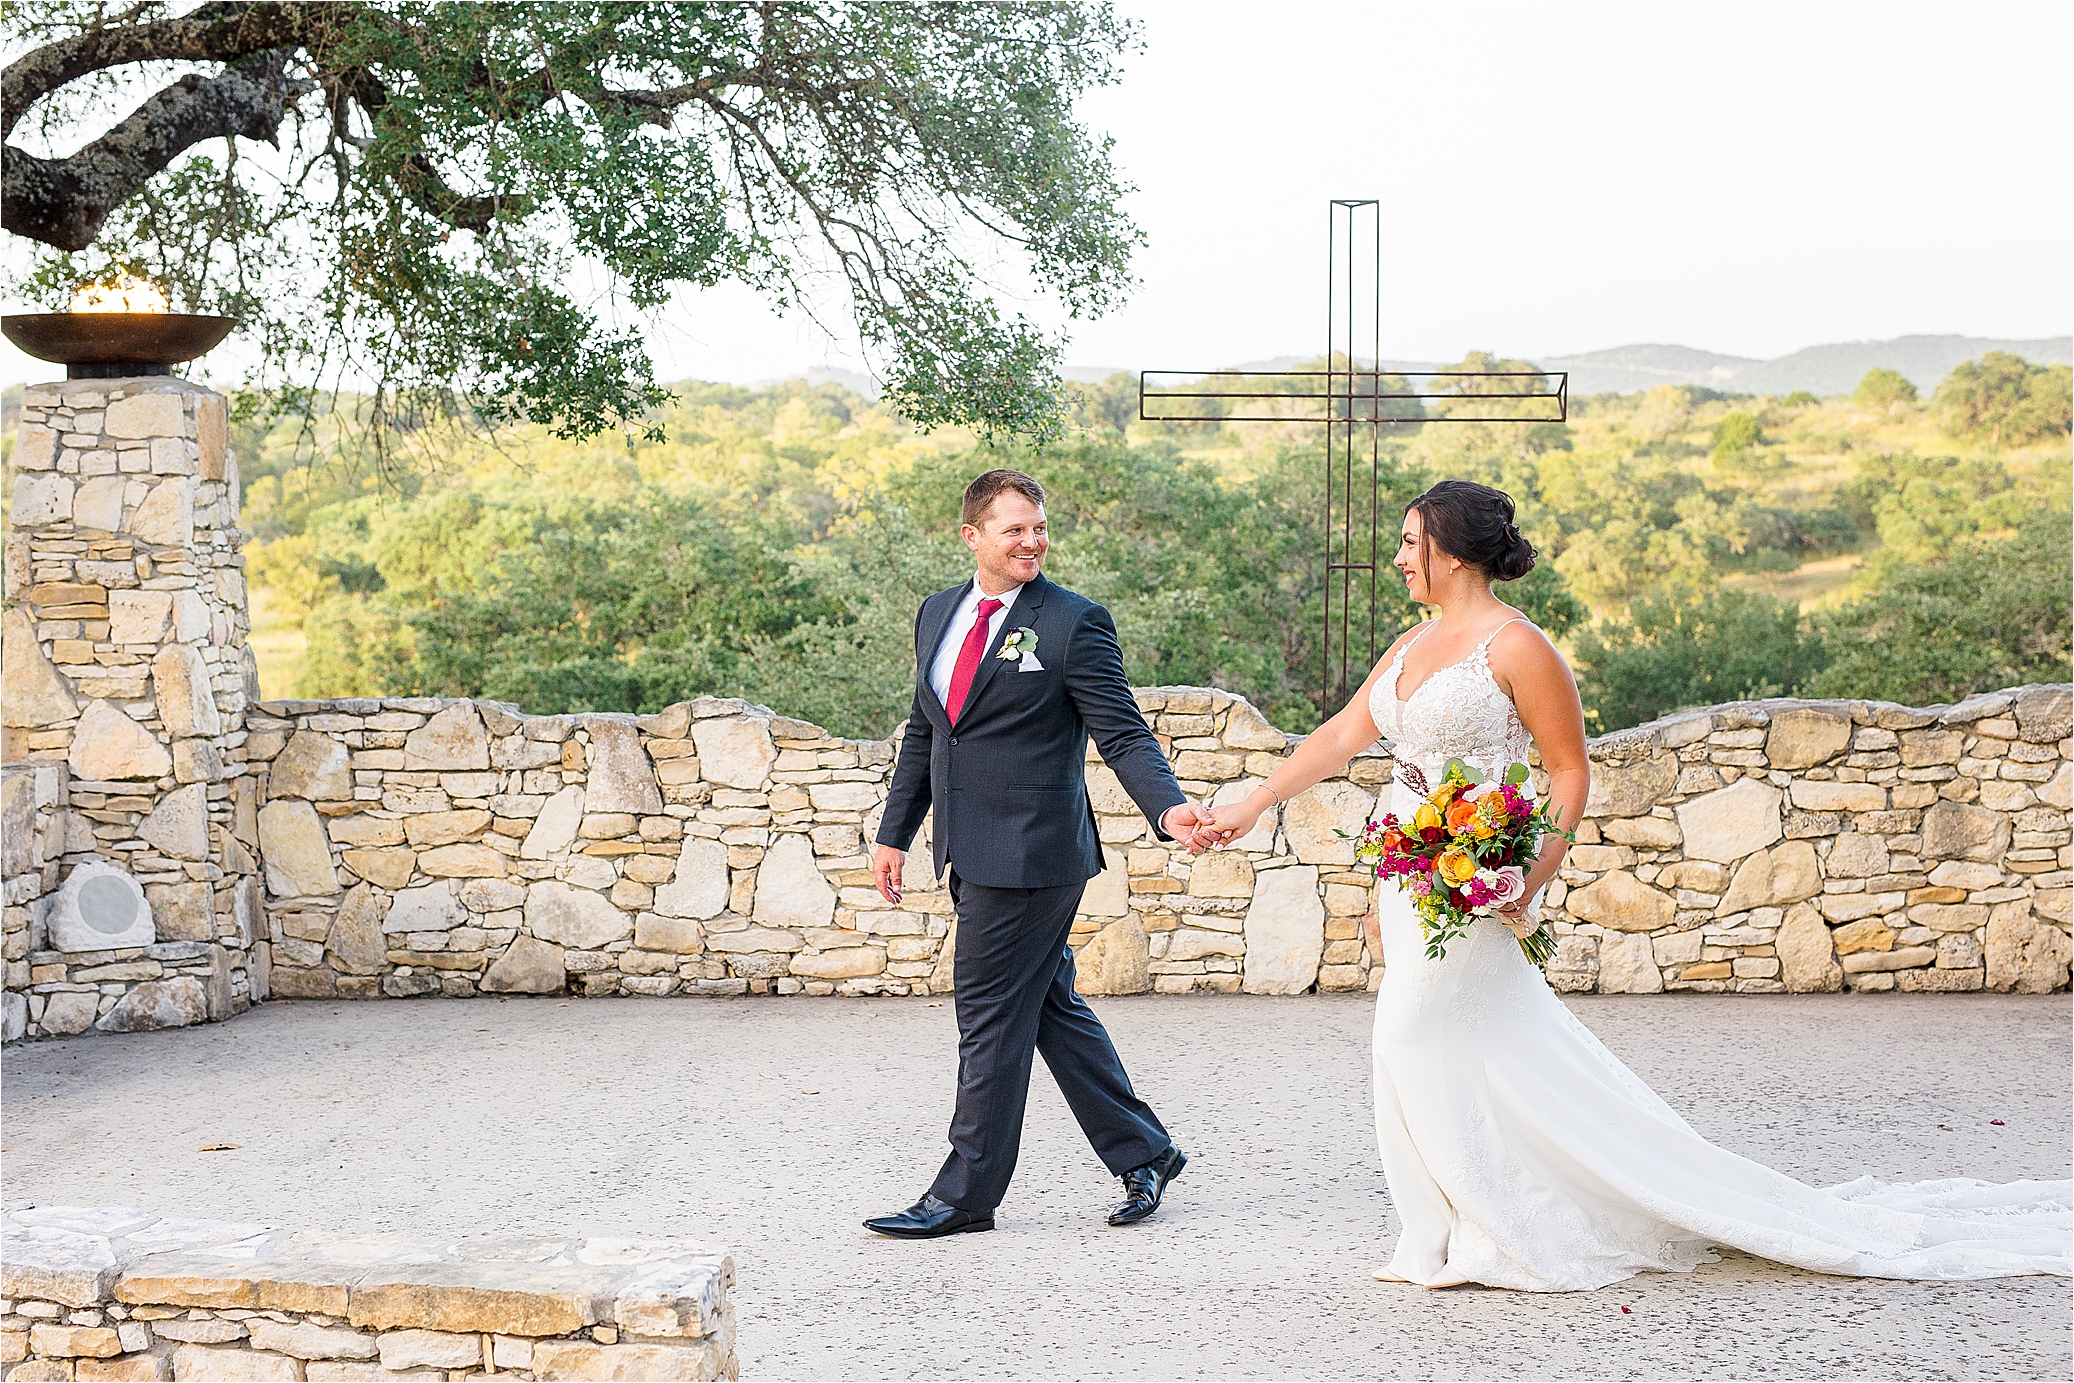 A groom leads his bride in front of sweeping hill country views at Paniolo Ranch in Boerne, Texas